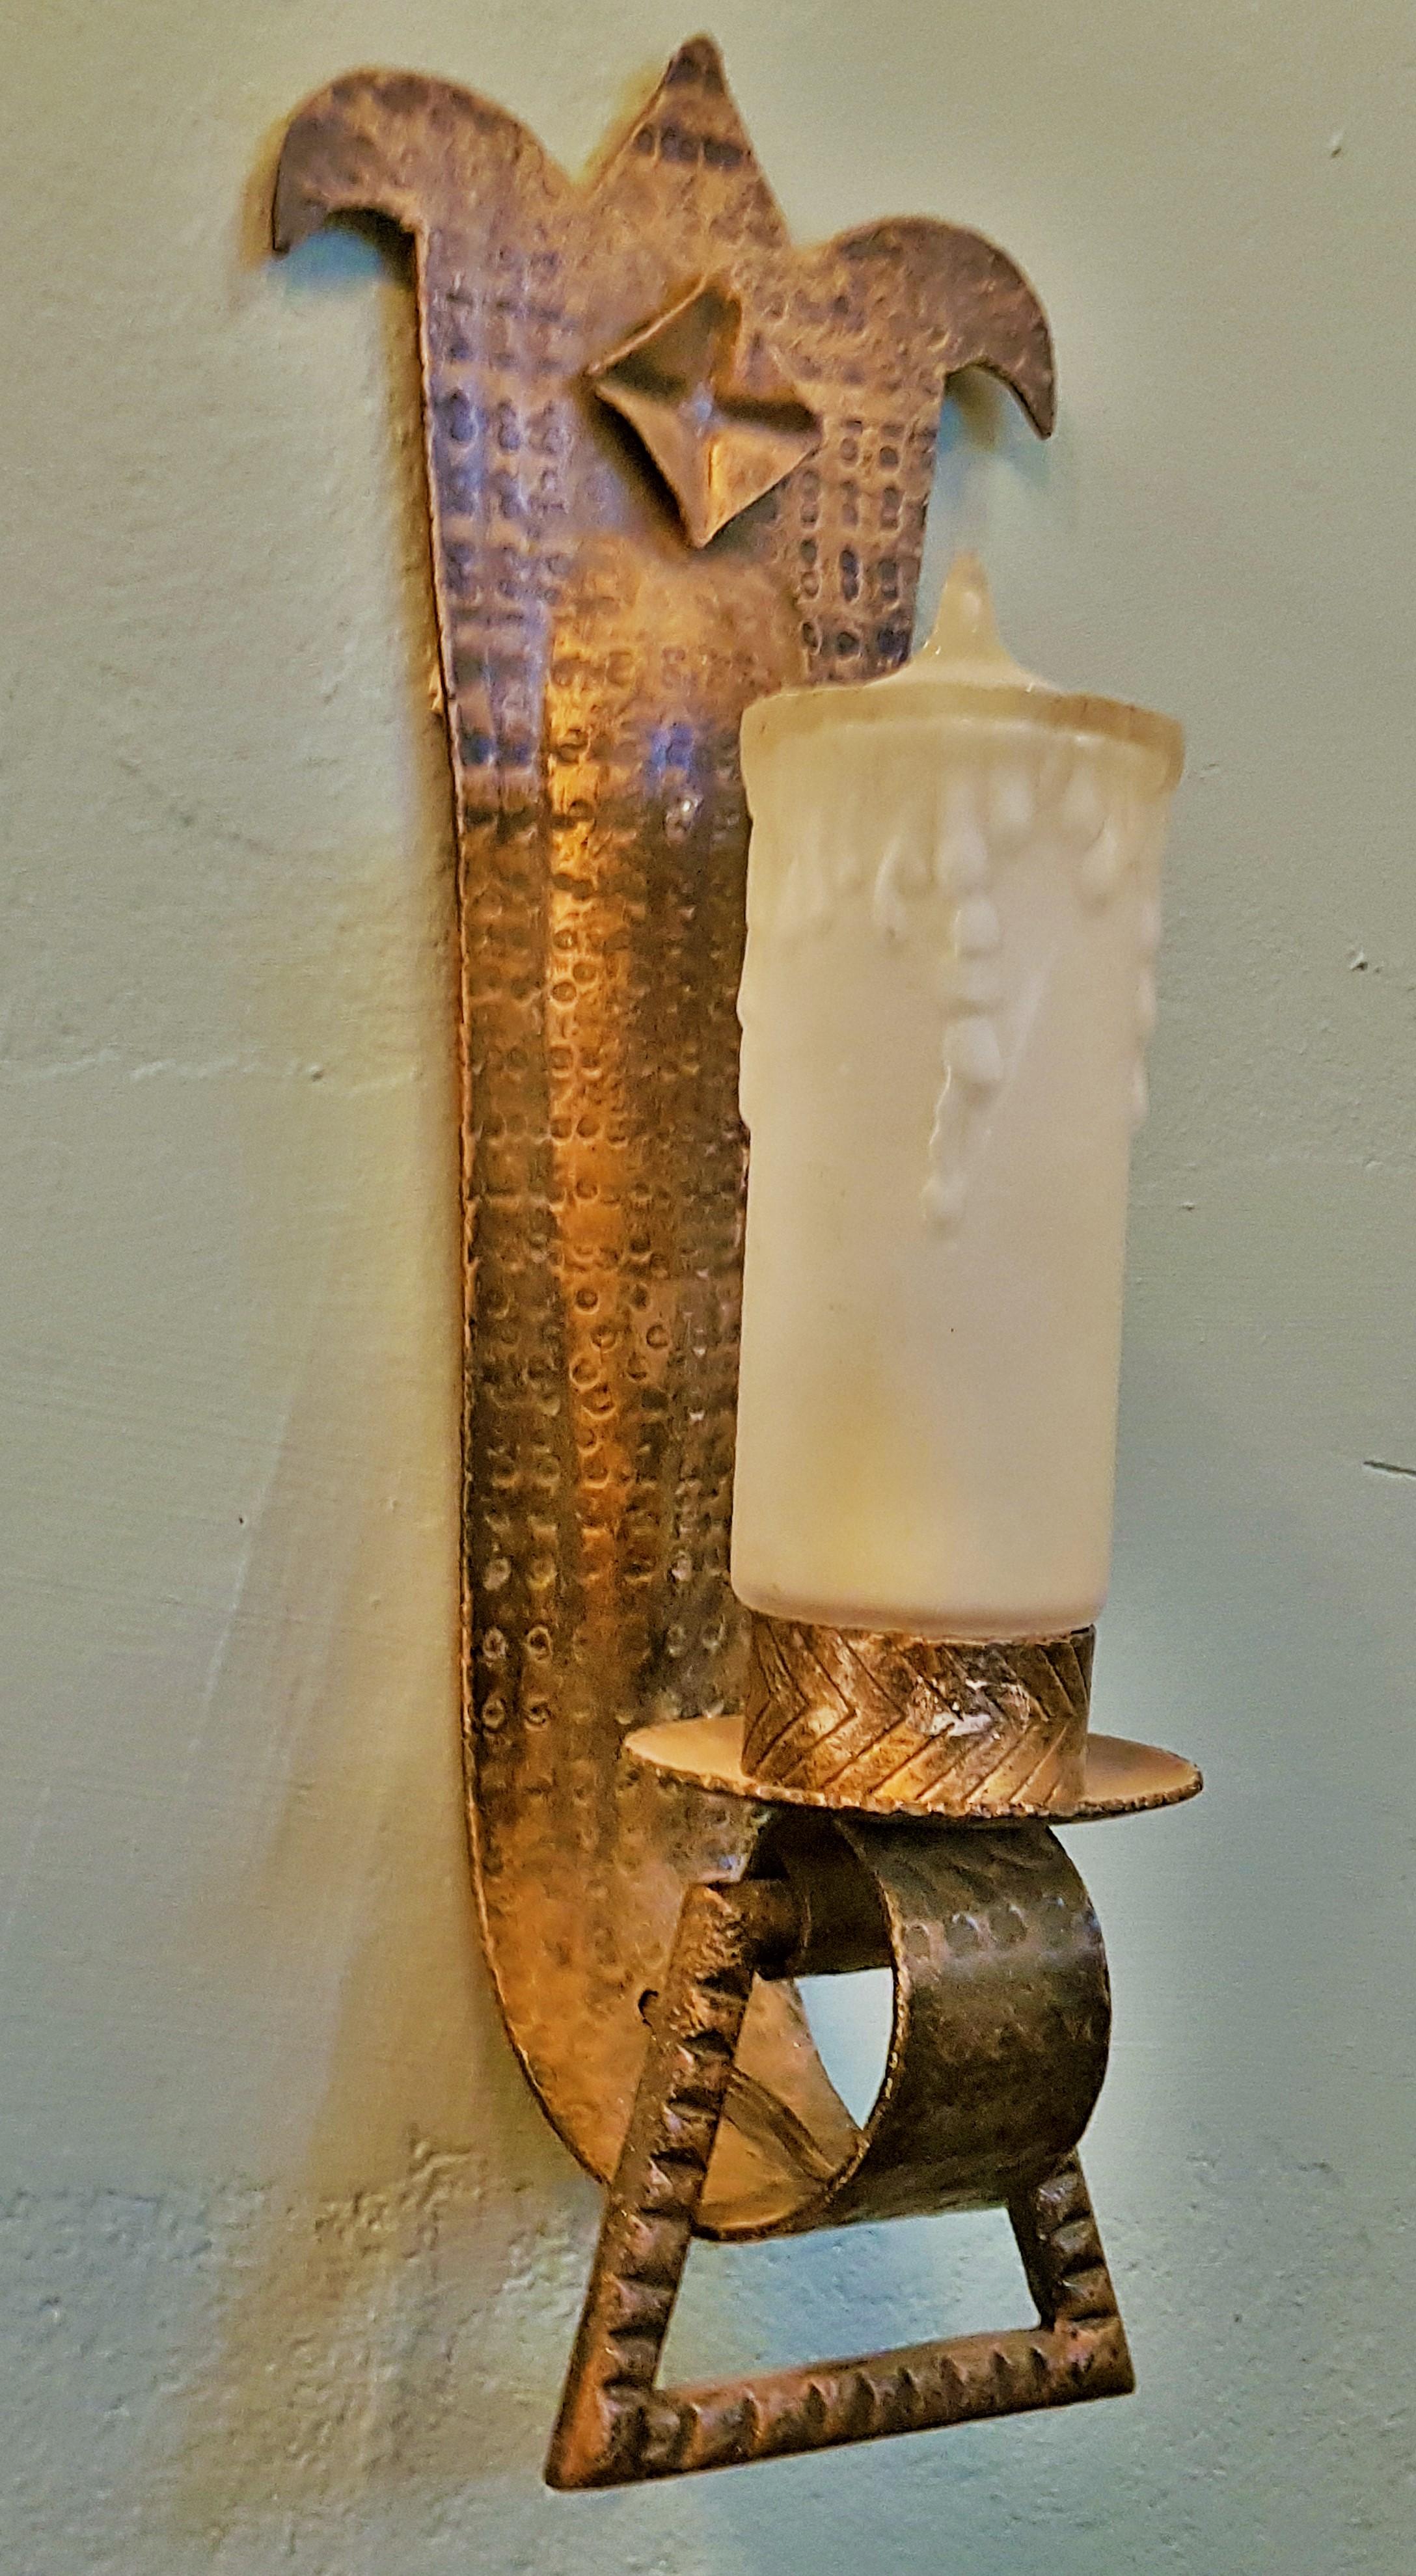 Pair of Art Deco Sconces, Glass and Gilded Metal, France, 1935 For Sale 12